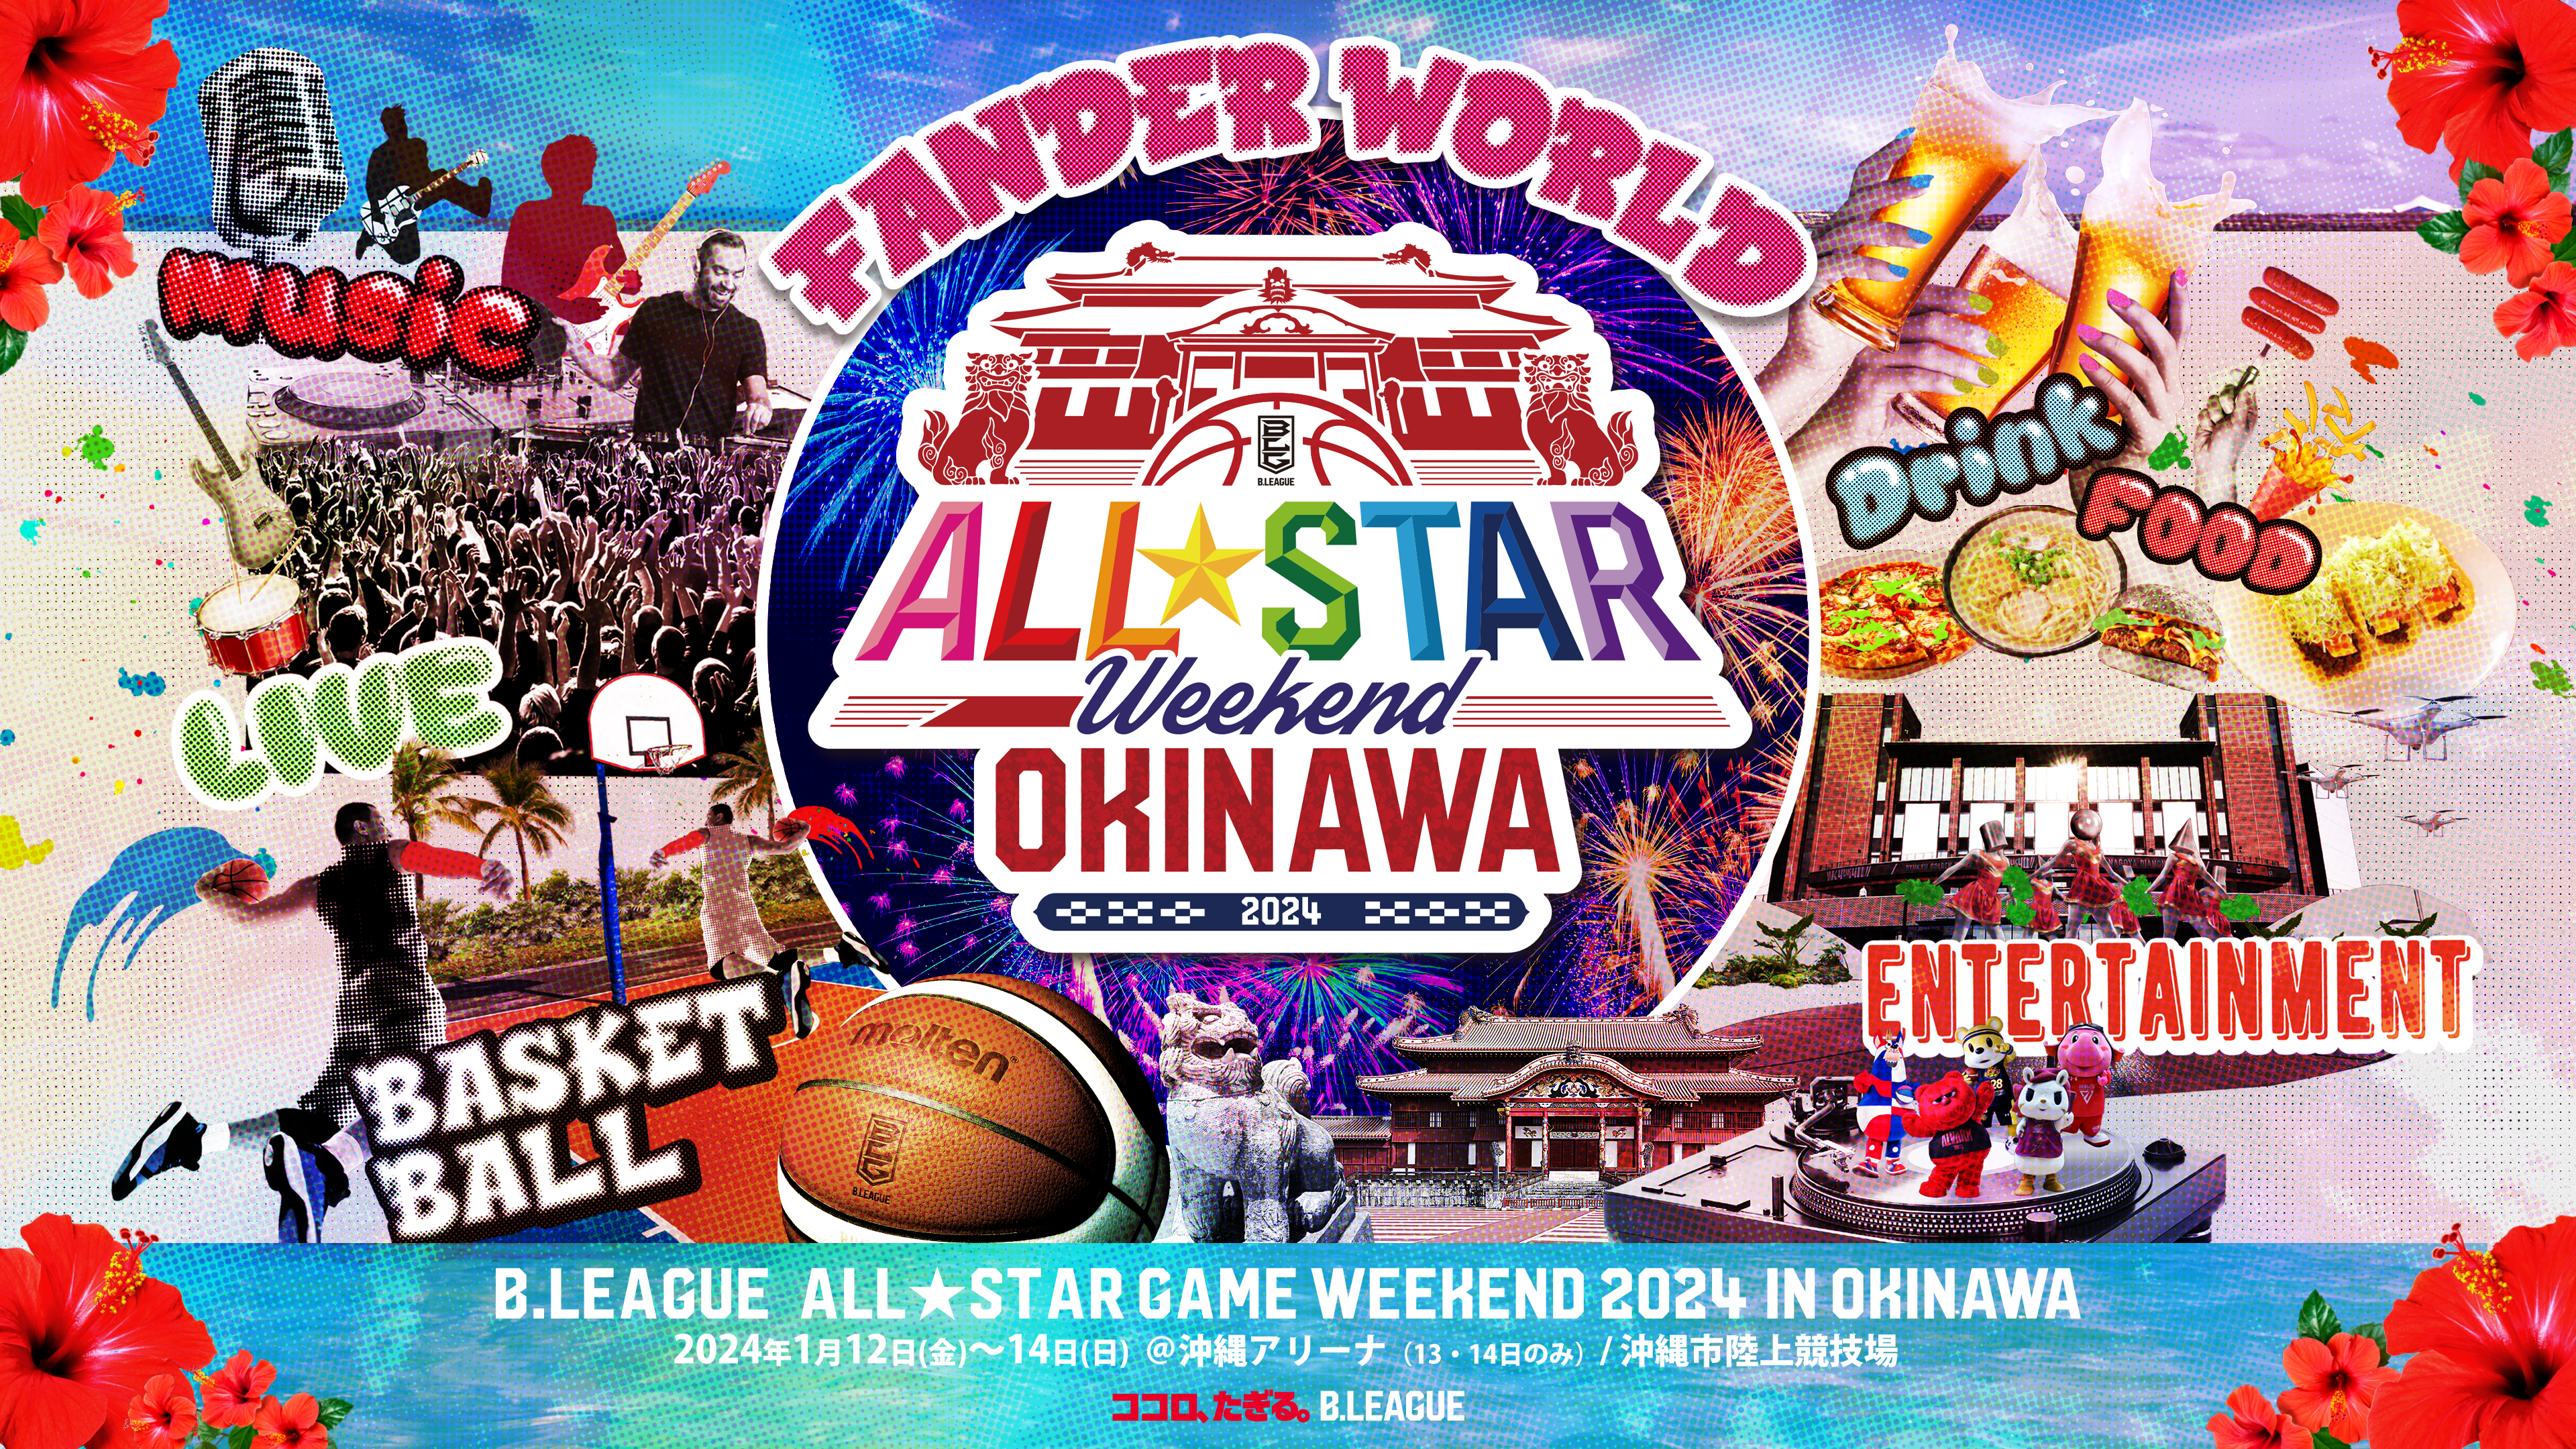 B.LEAGUE ALL-STAR GAME WEEKEND 2024 IN OKINAWA」 各イベントの出場 